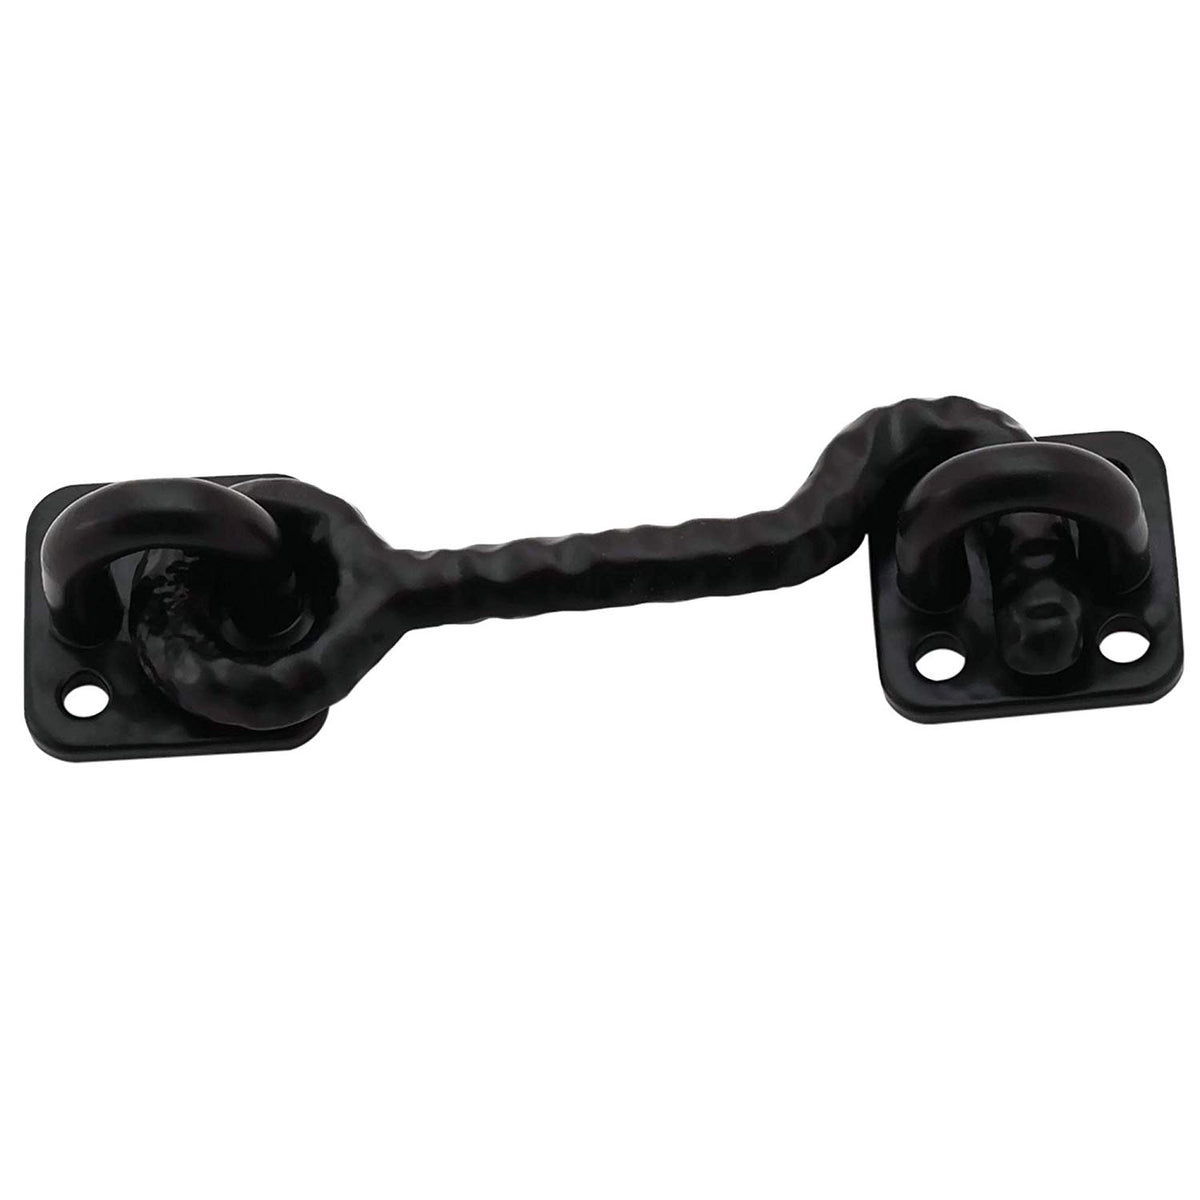 Sliding Barn Door Cast Iron Hook Latch Lock Texture Vintage Country Rustic Decor for Gate Cabinet Log Home Cabin and Shed